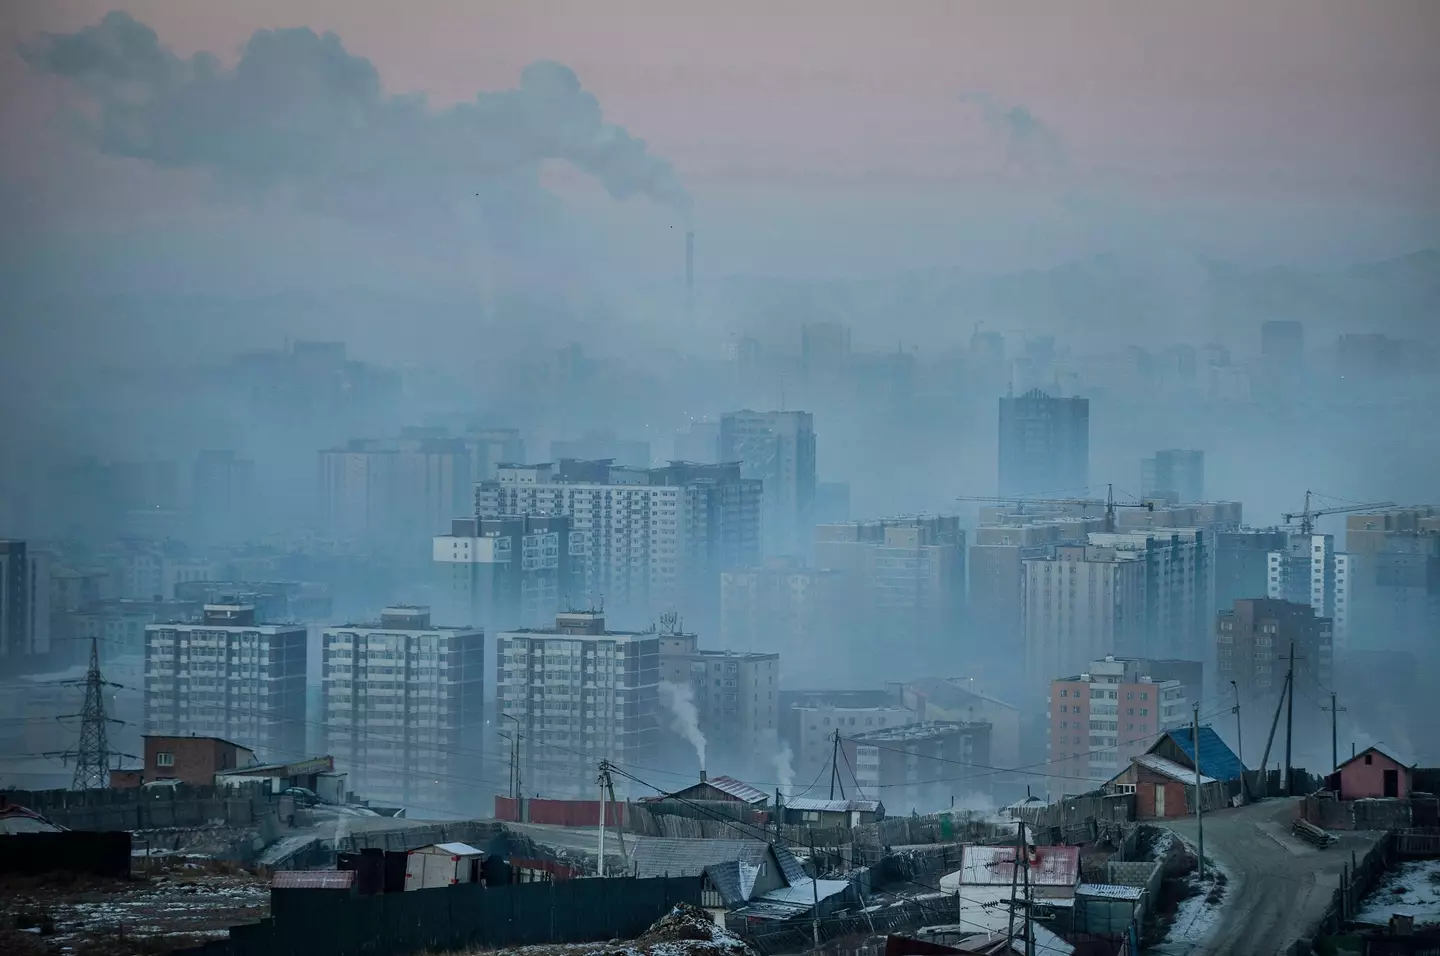 Ulaanbaatar is one of the most polluted capital cities in the world.